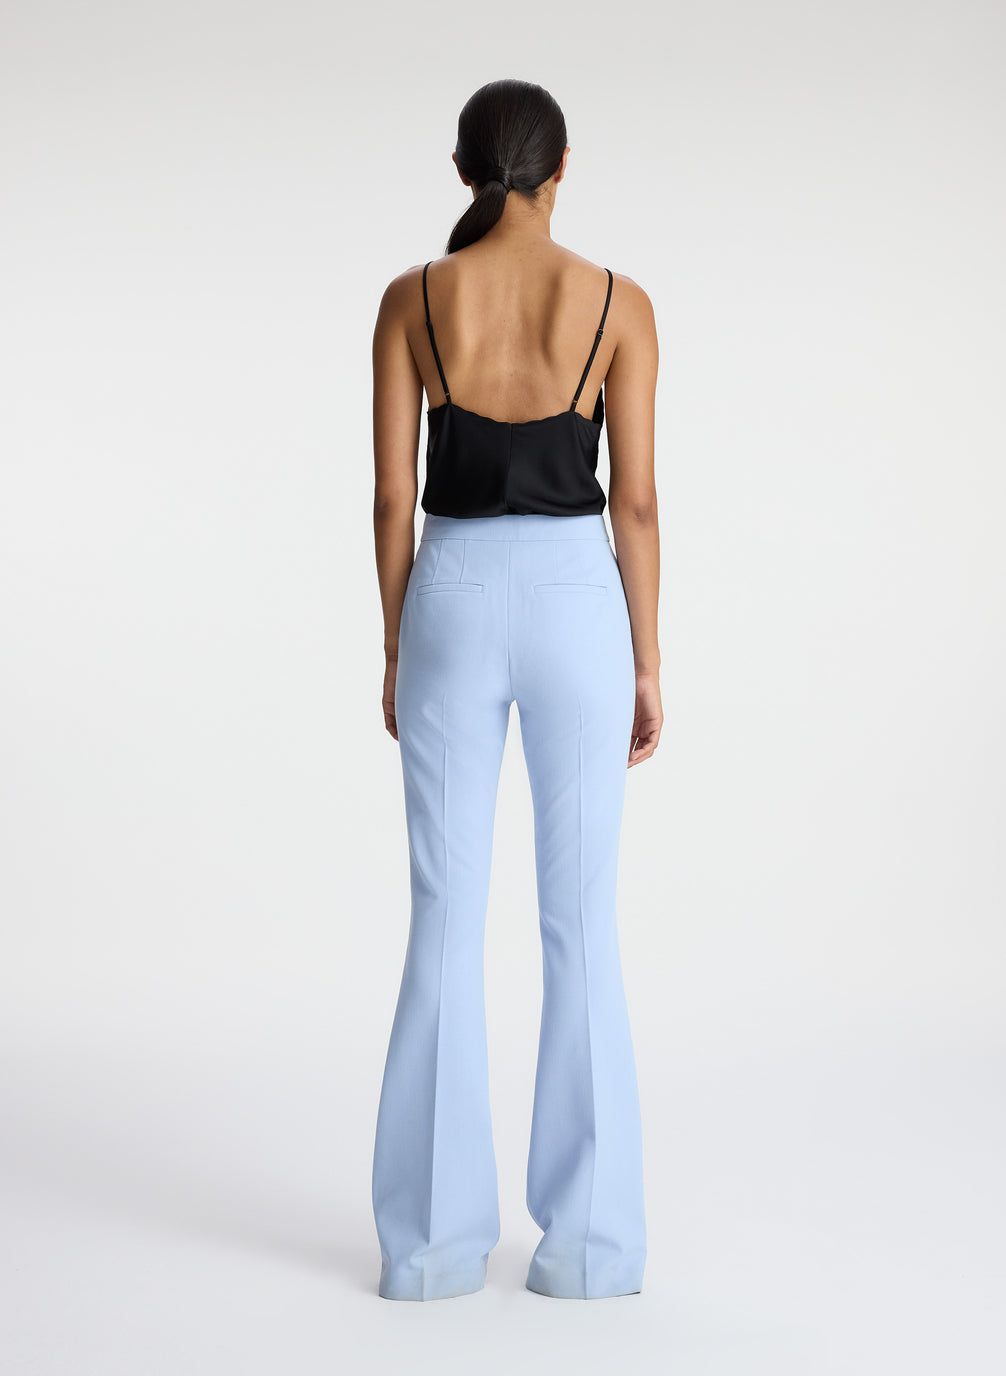 back view of woman wearing black satin camisole with light blue pants